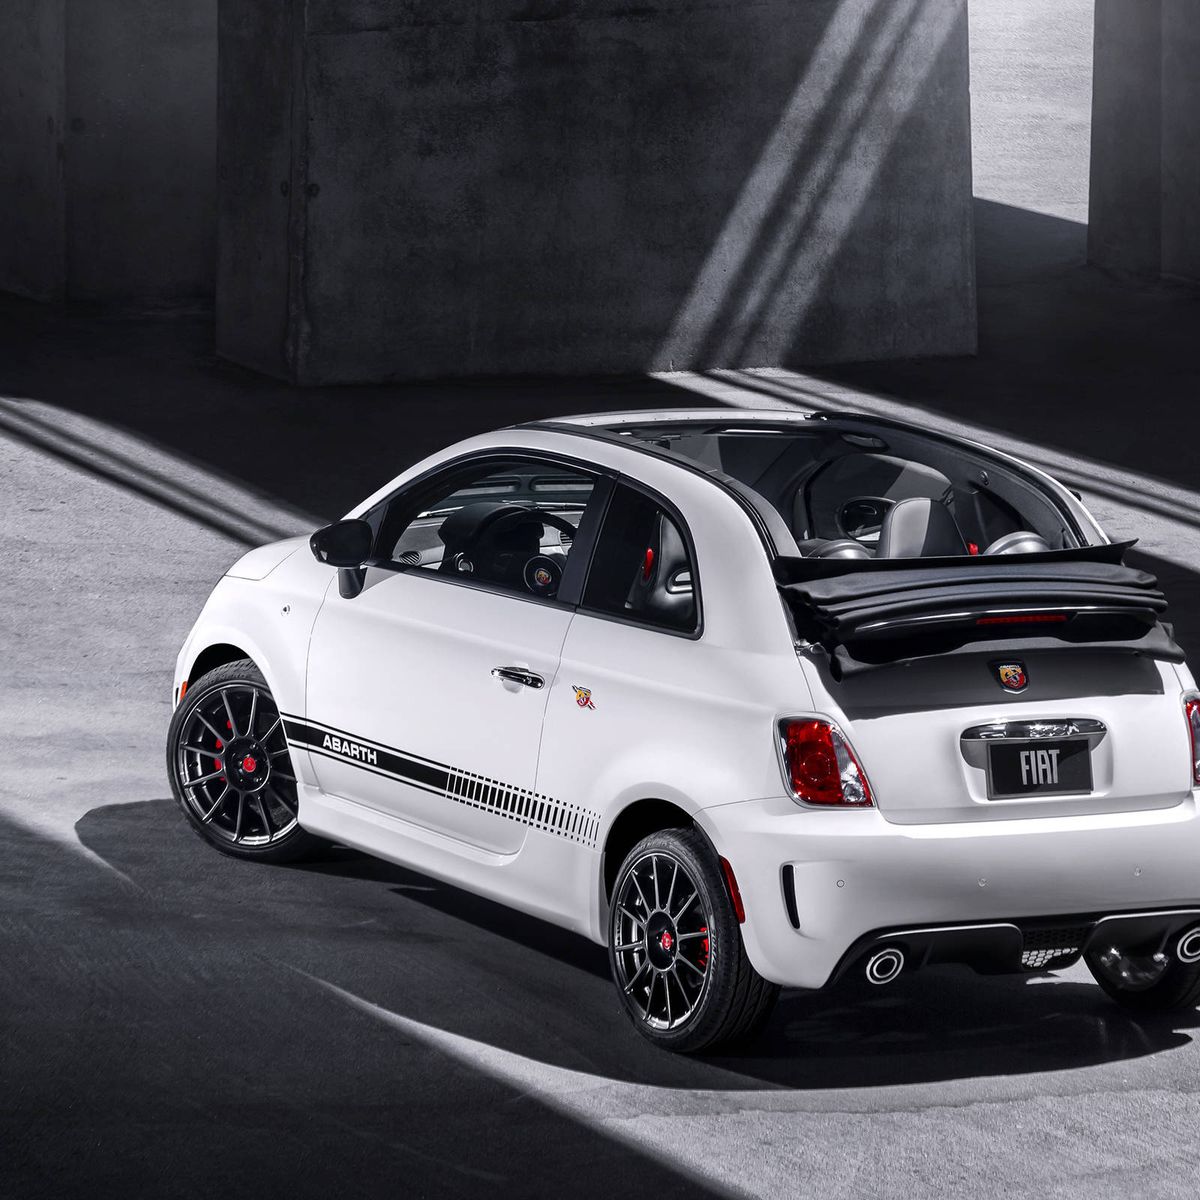 2016 Fiat 500c Abarth review: Works hard for the money